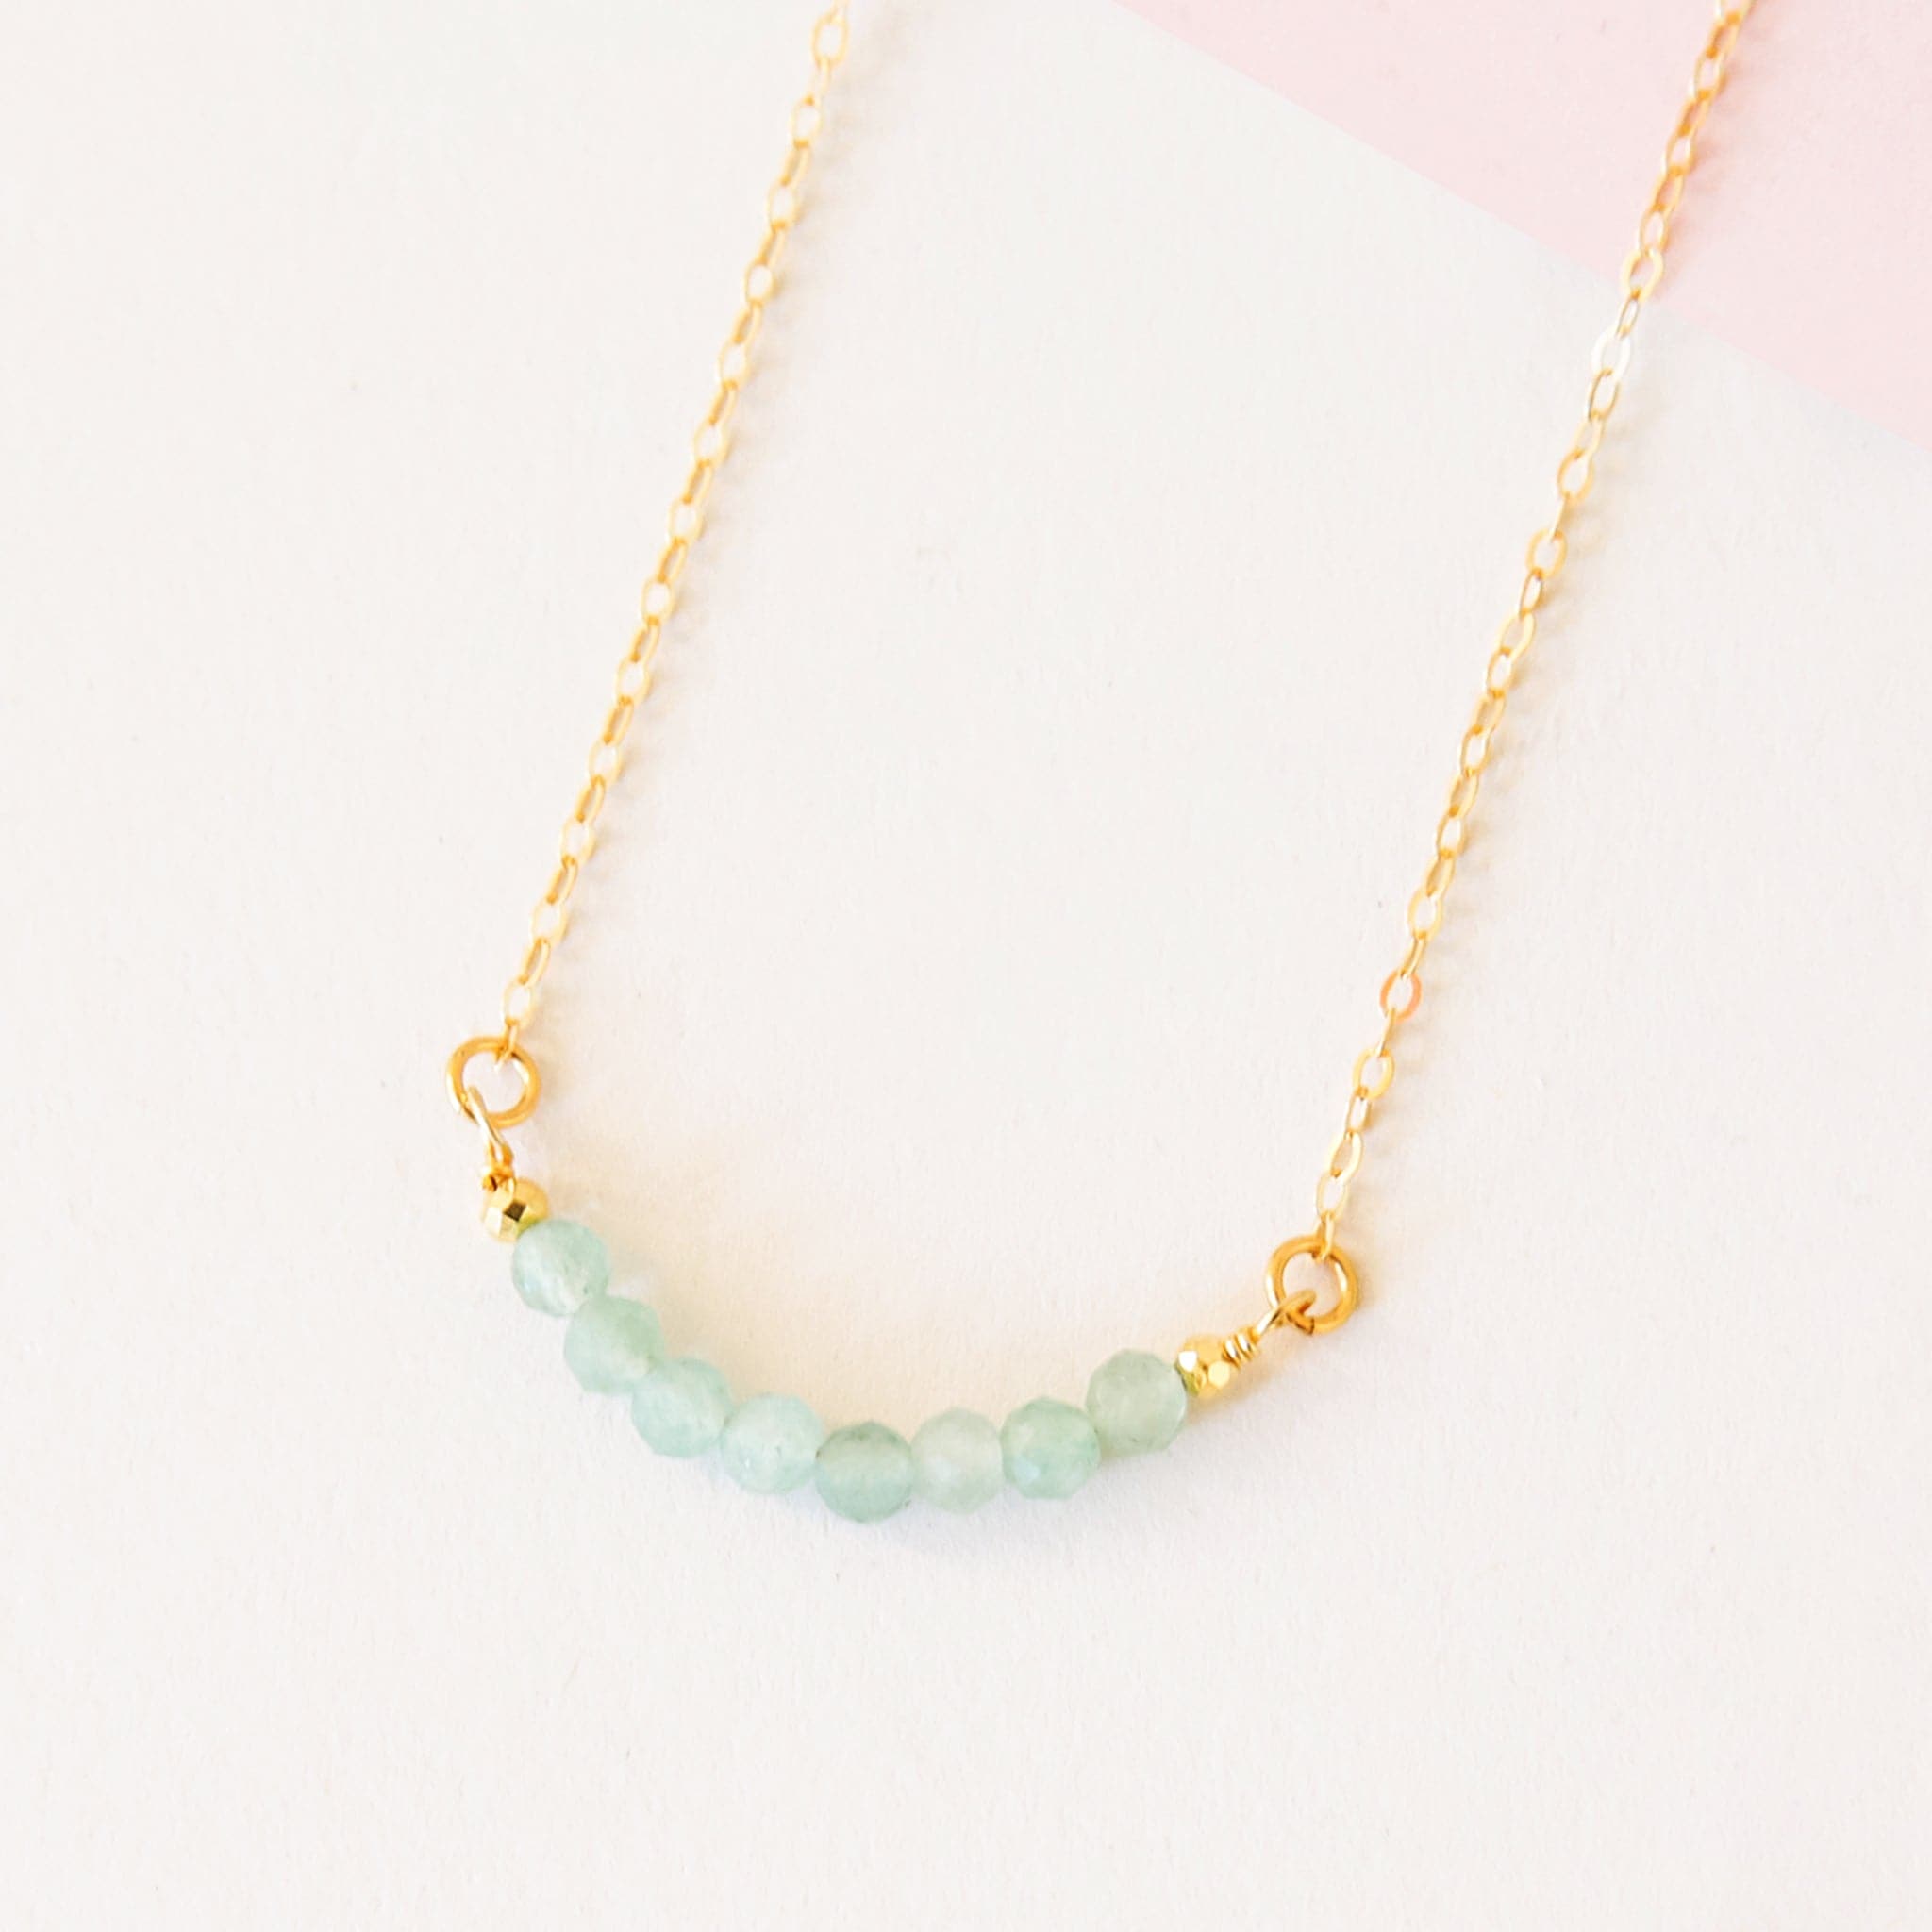 Eight amazonite beads lined up on a gold chain.